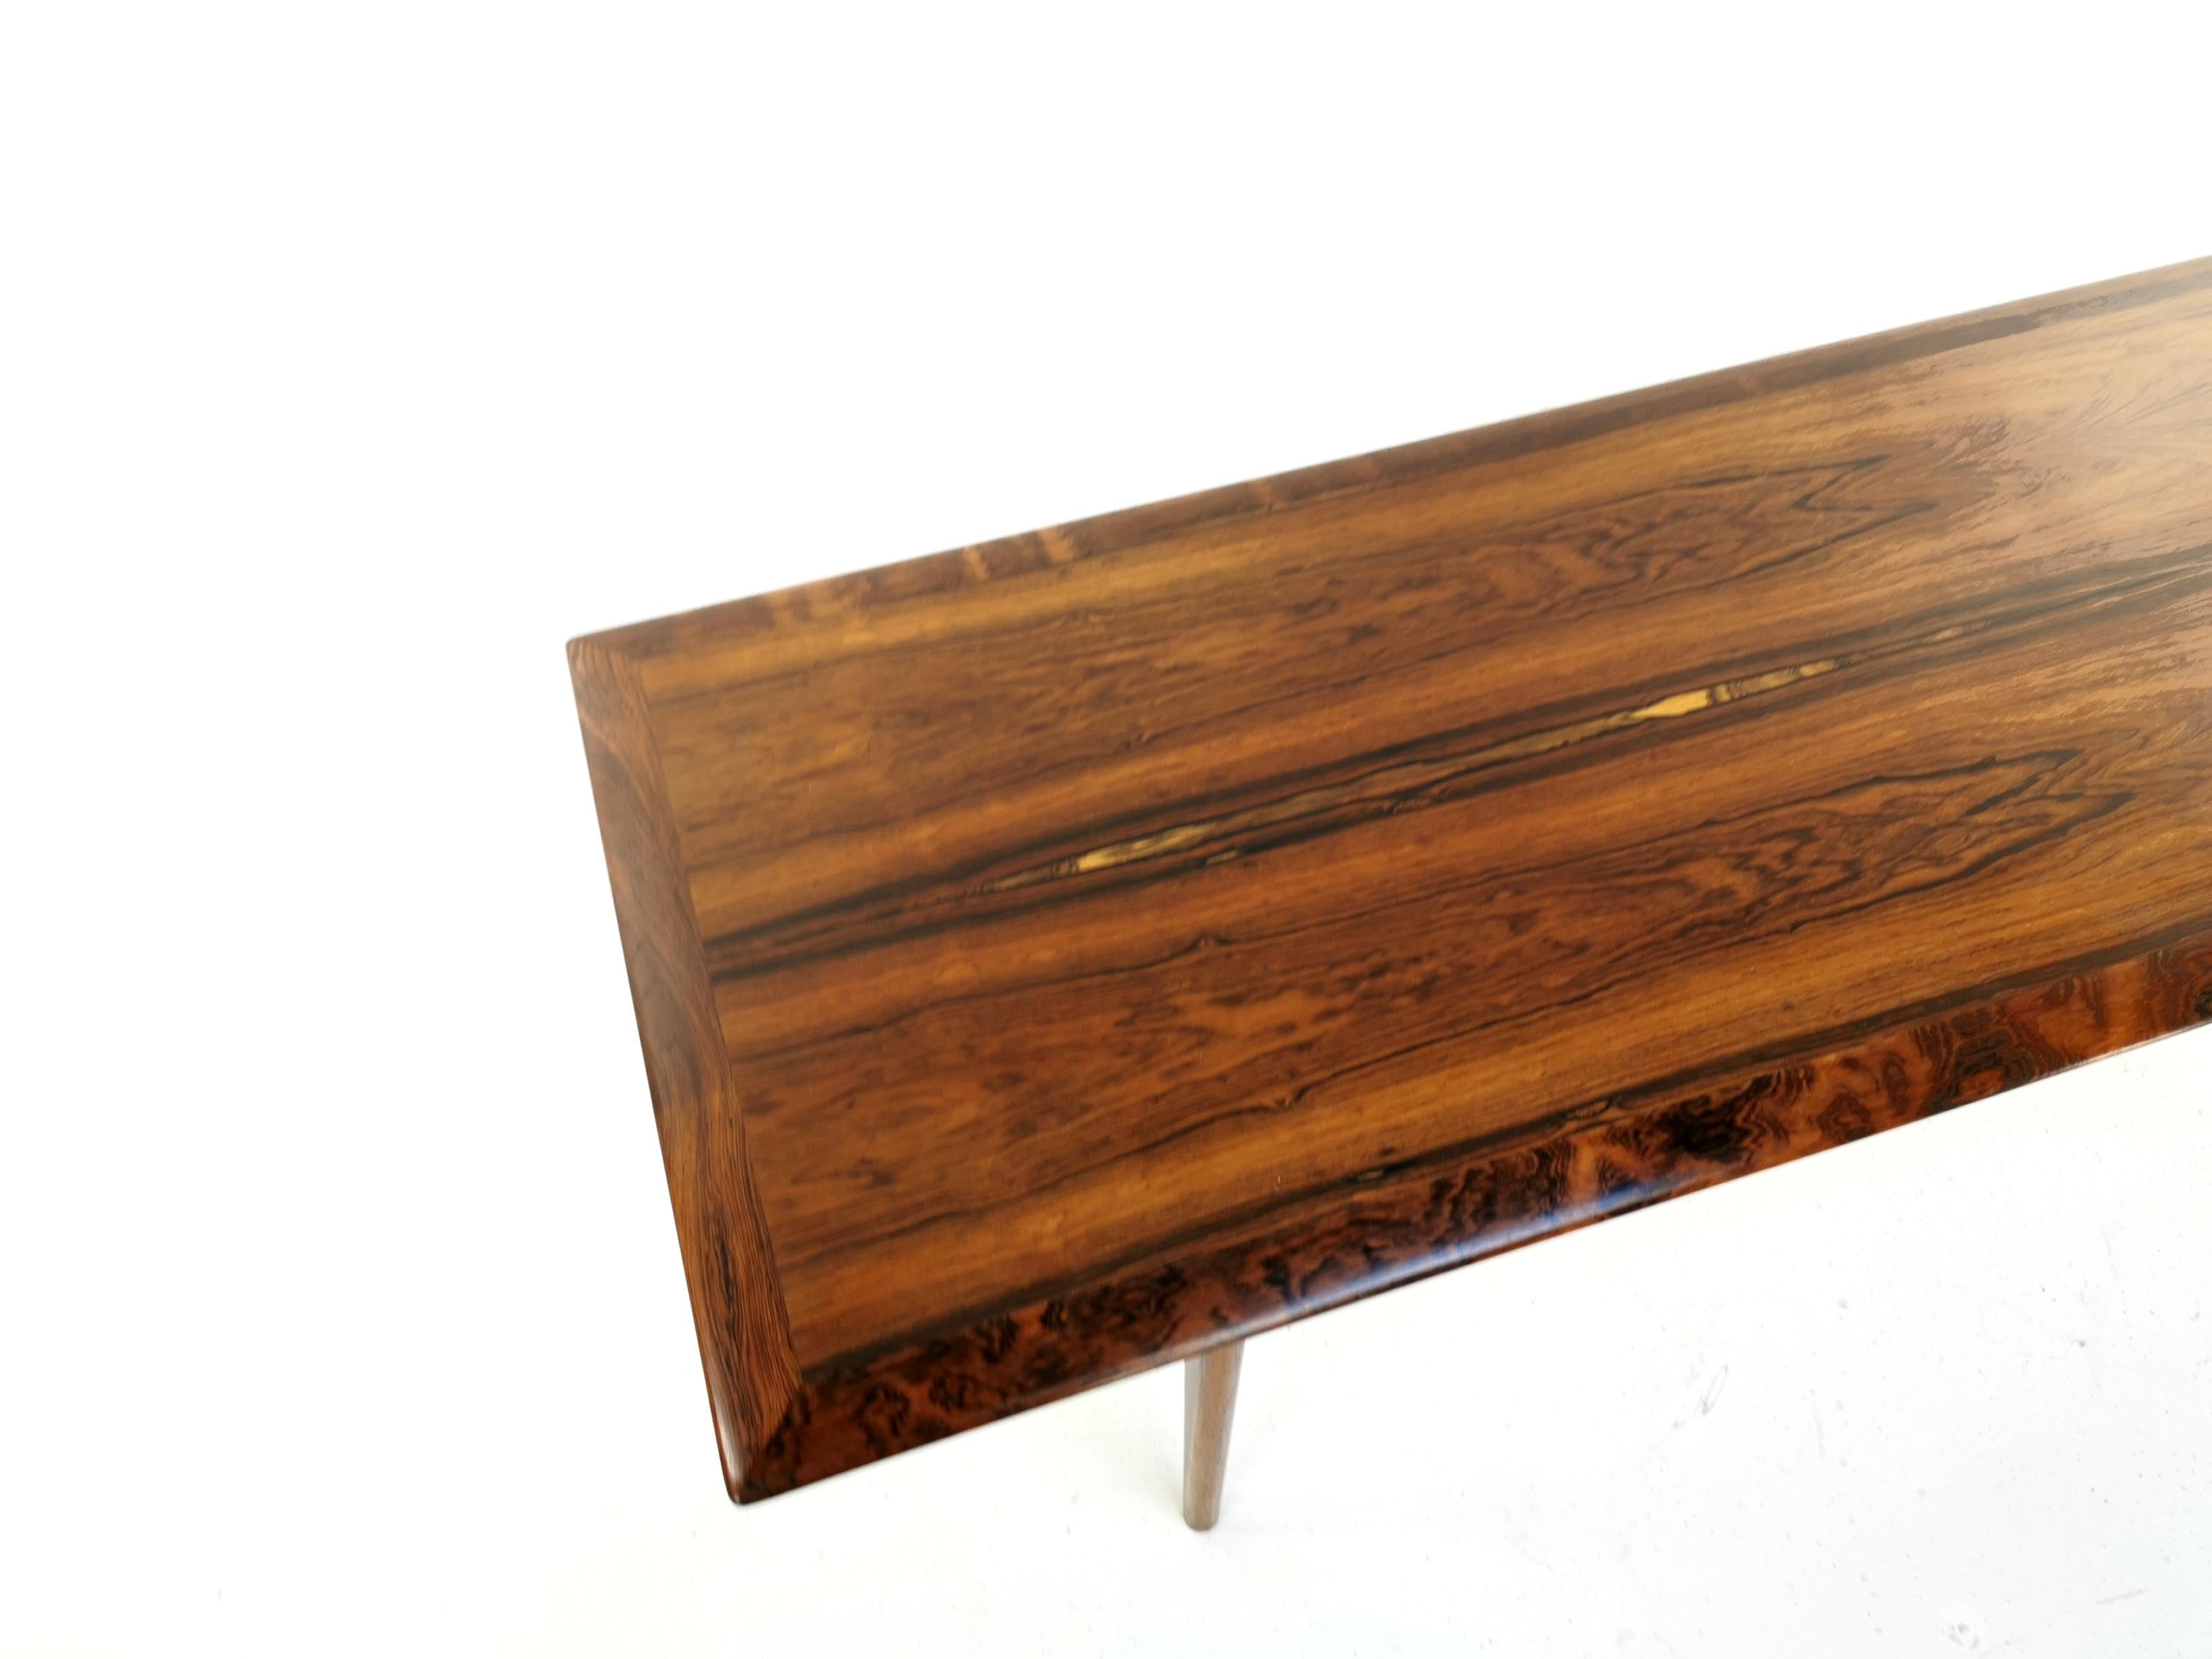 Solid rosewood coffee table produced by Silkeborg Møbelfabrik of Denmark, in the 1960s.

Very desirable table with sculptural design.

Completely original and a very well cared for example.

Dimensions (cm): 166 W x 56 D x 50 H. 

Condition: